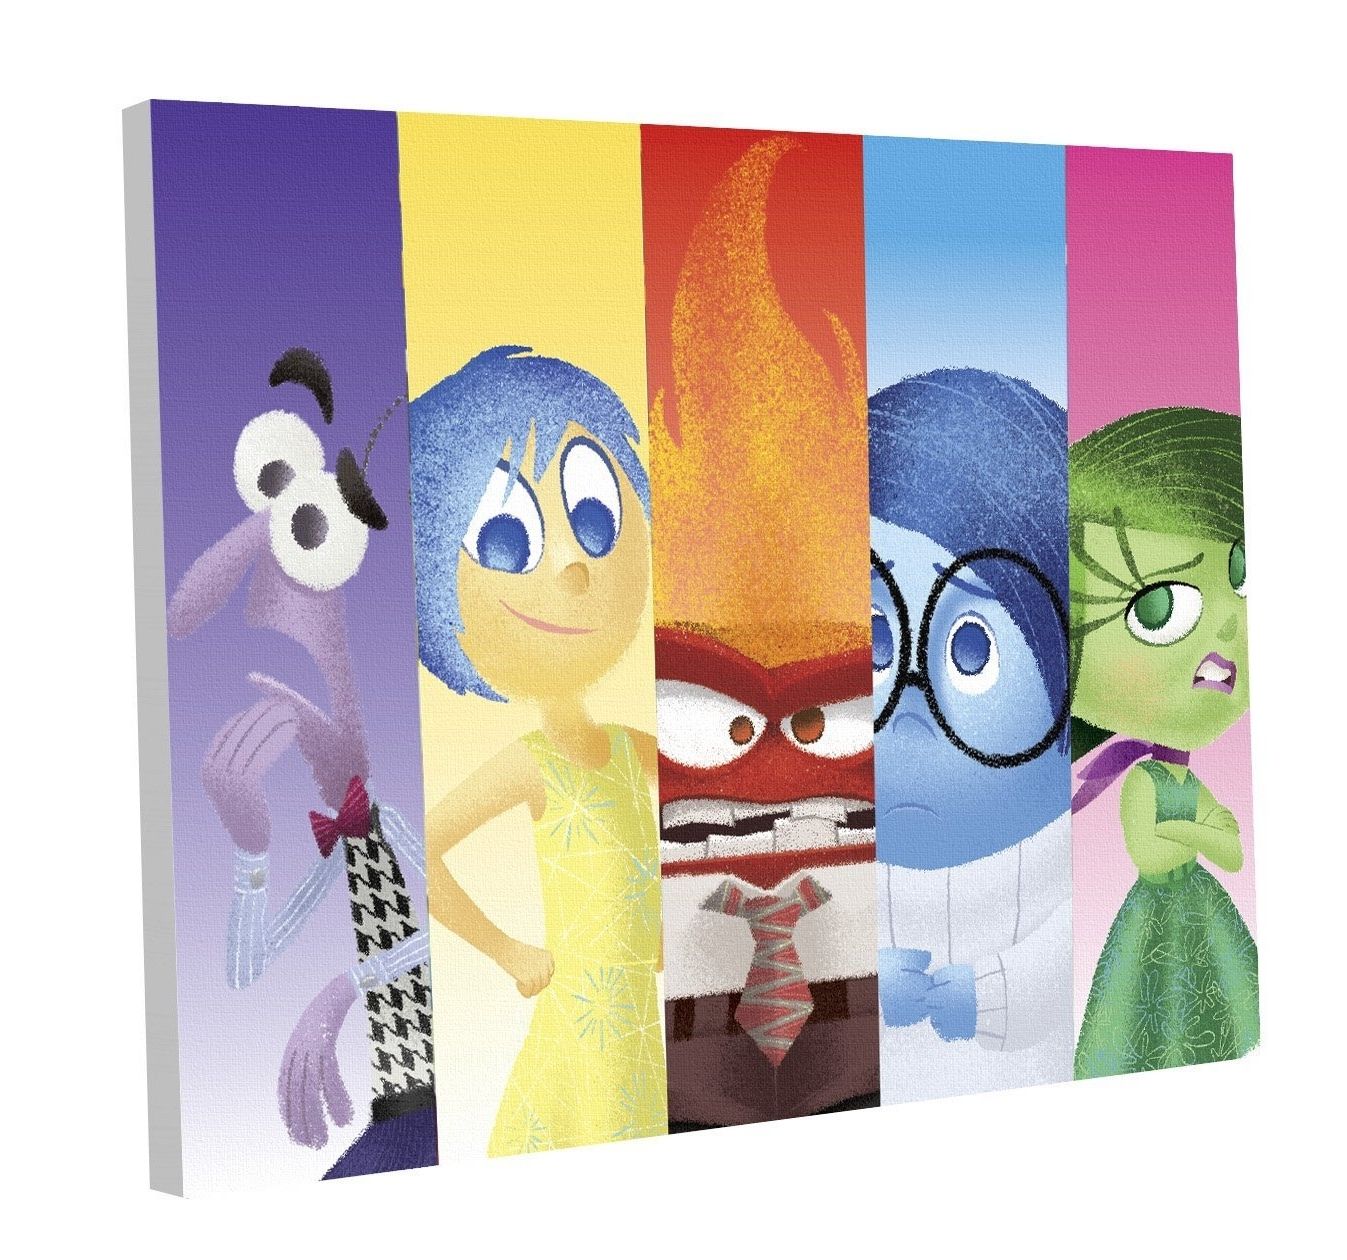 Inside Out Bedding, Wall Art, And Bedroom Decor – New For Trendy Disney Canvas Wall Art (View 3 of 15)